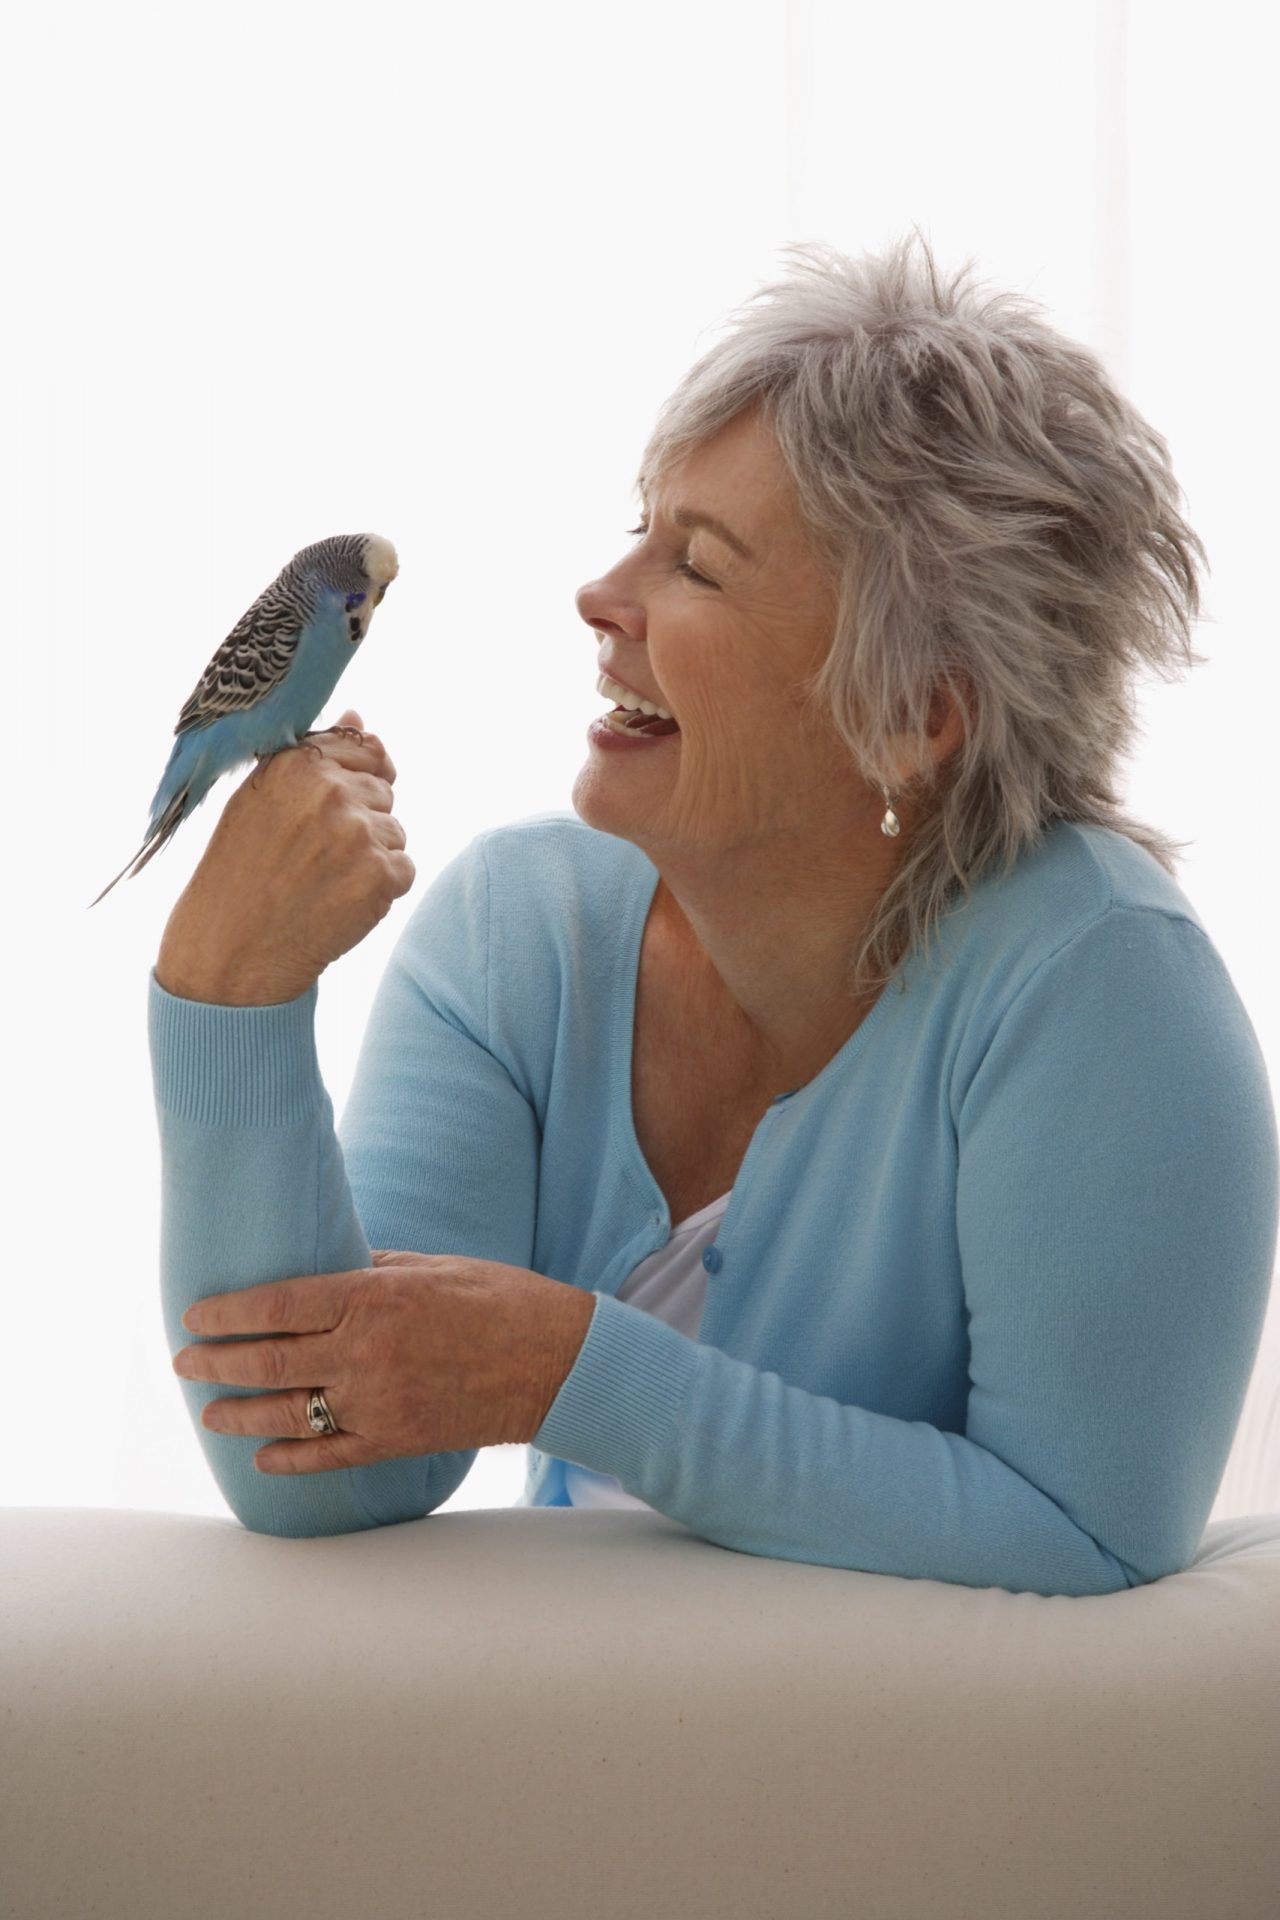 Elderly woman smiling at a blue parakeet perched on her hand, both enjoying a peaceful moment.